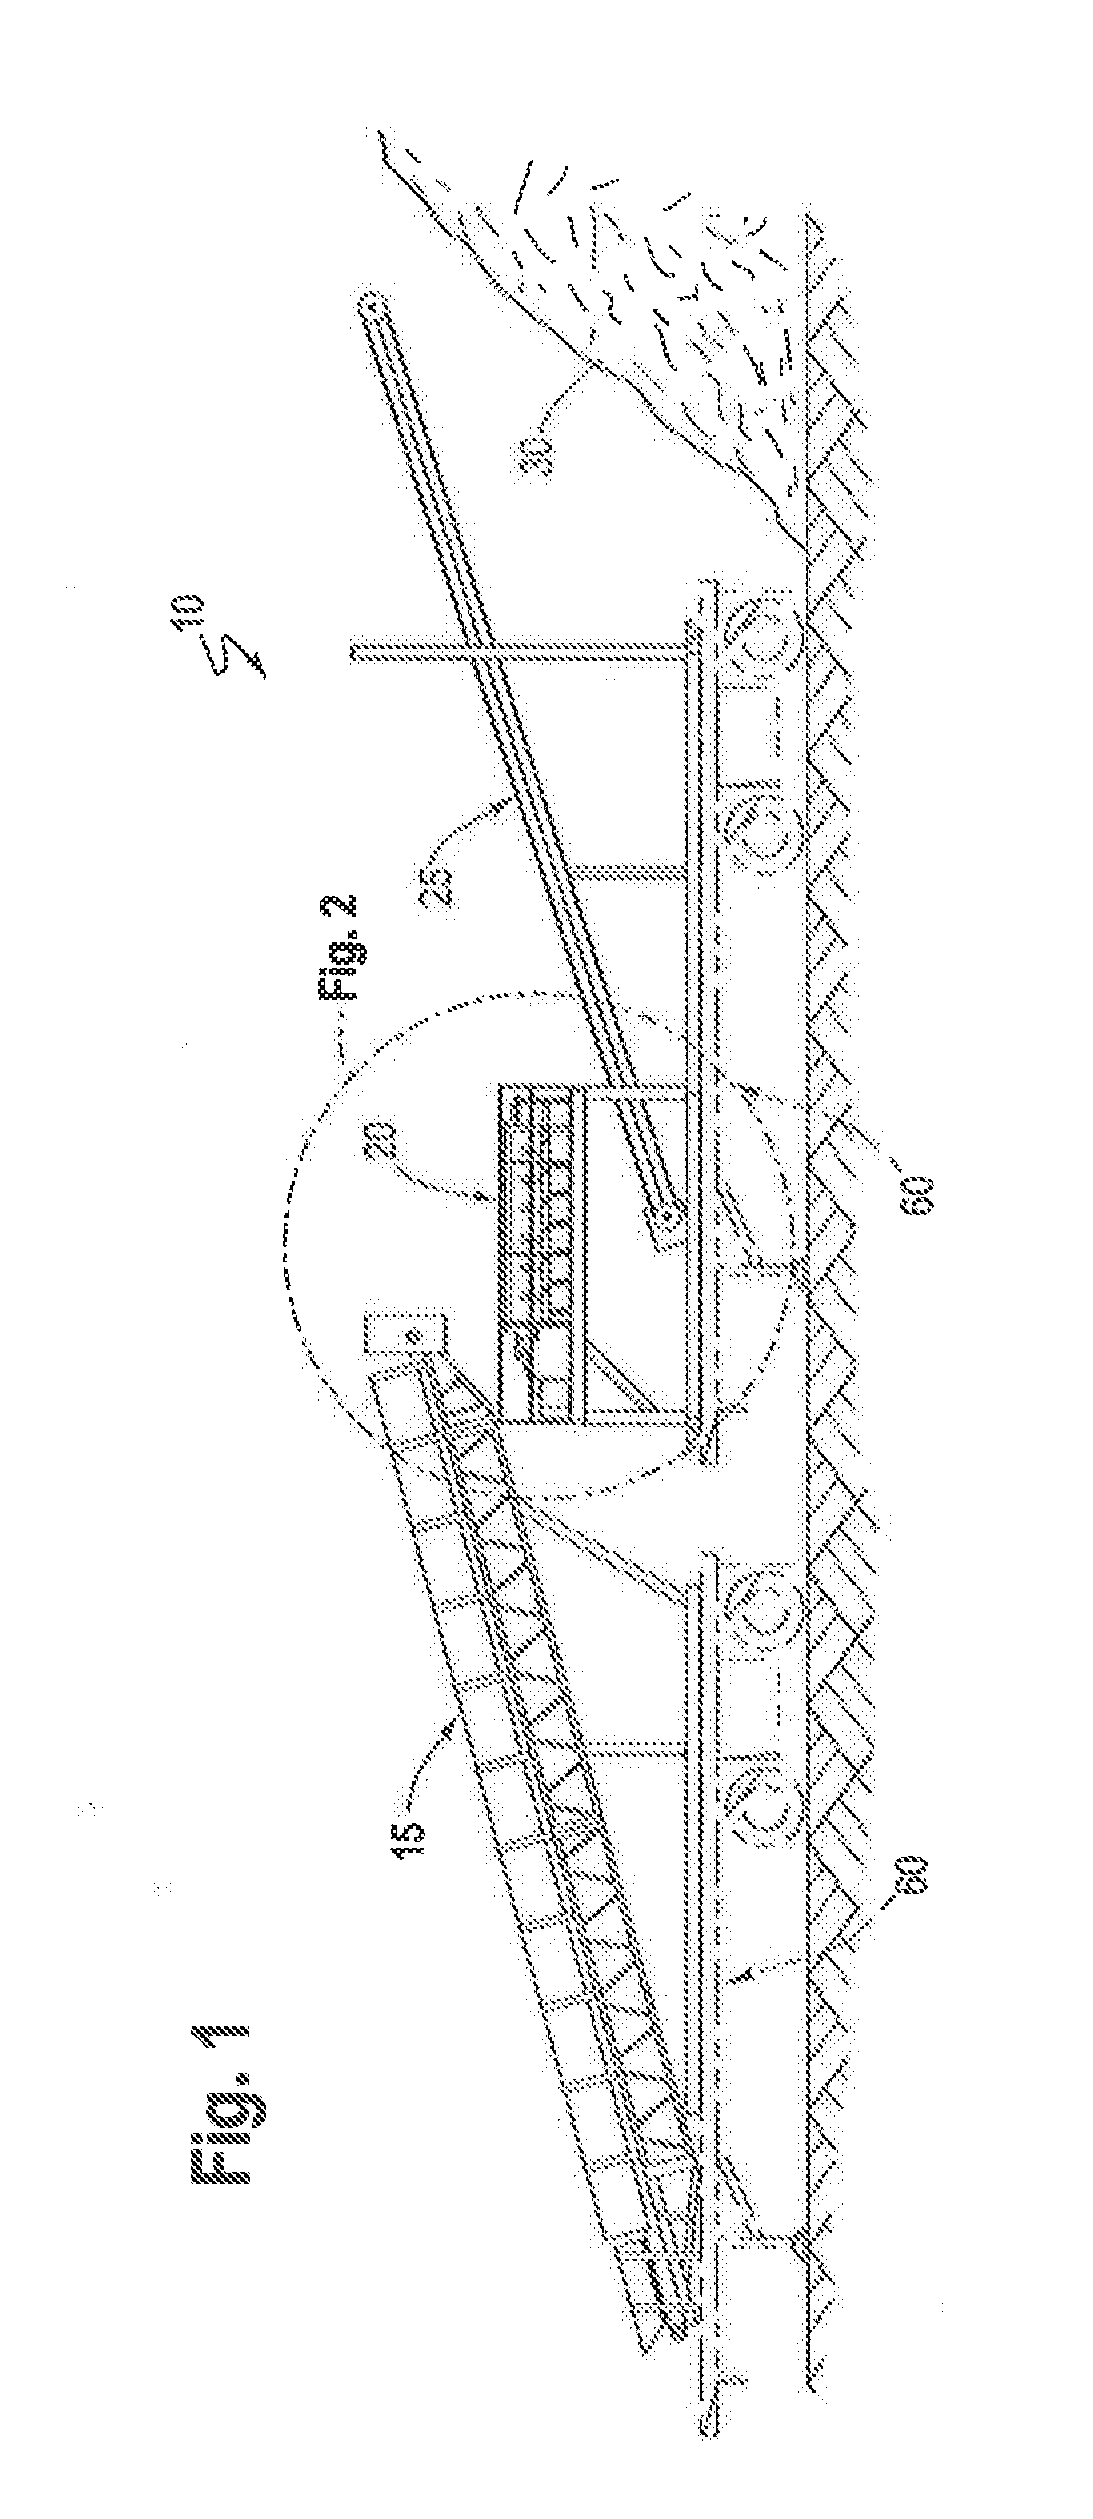 Portable system and method for processing waste to be placed in landfill